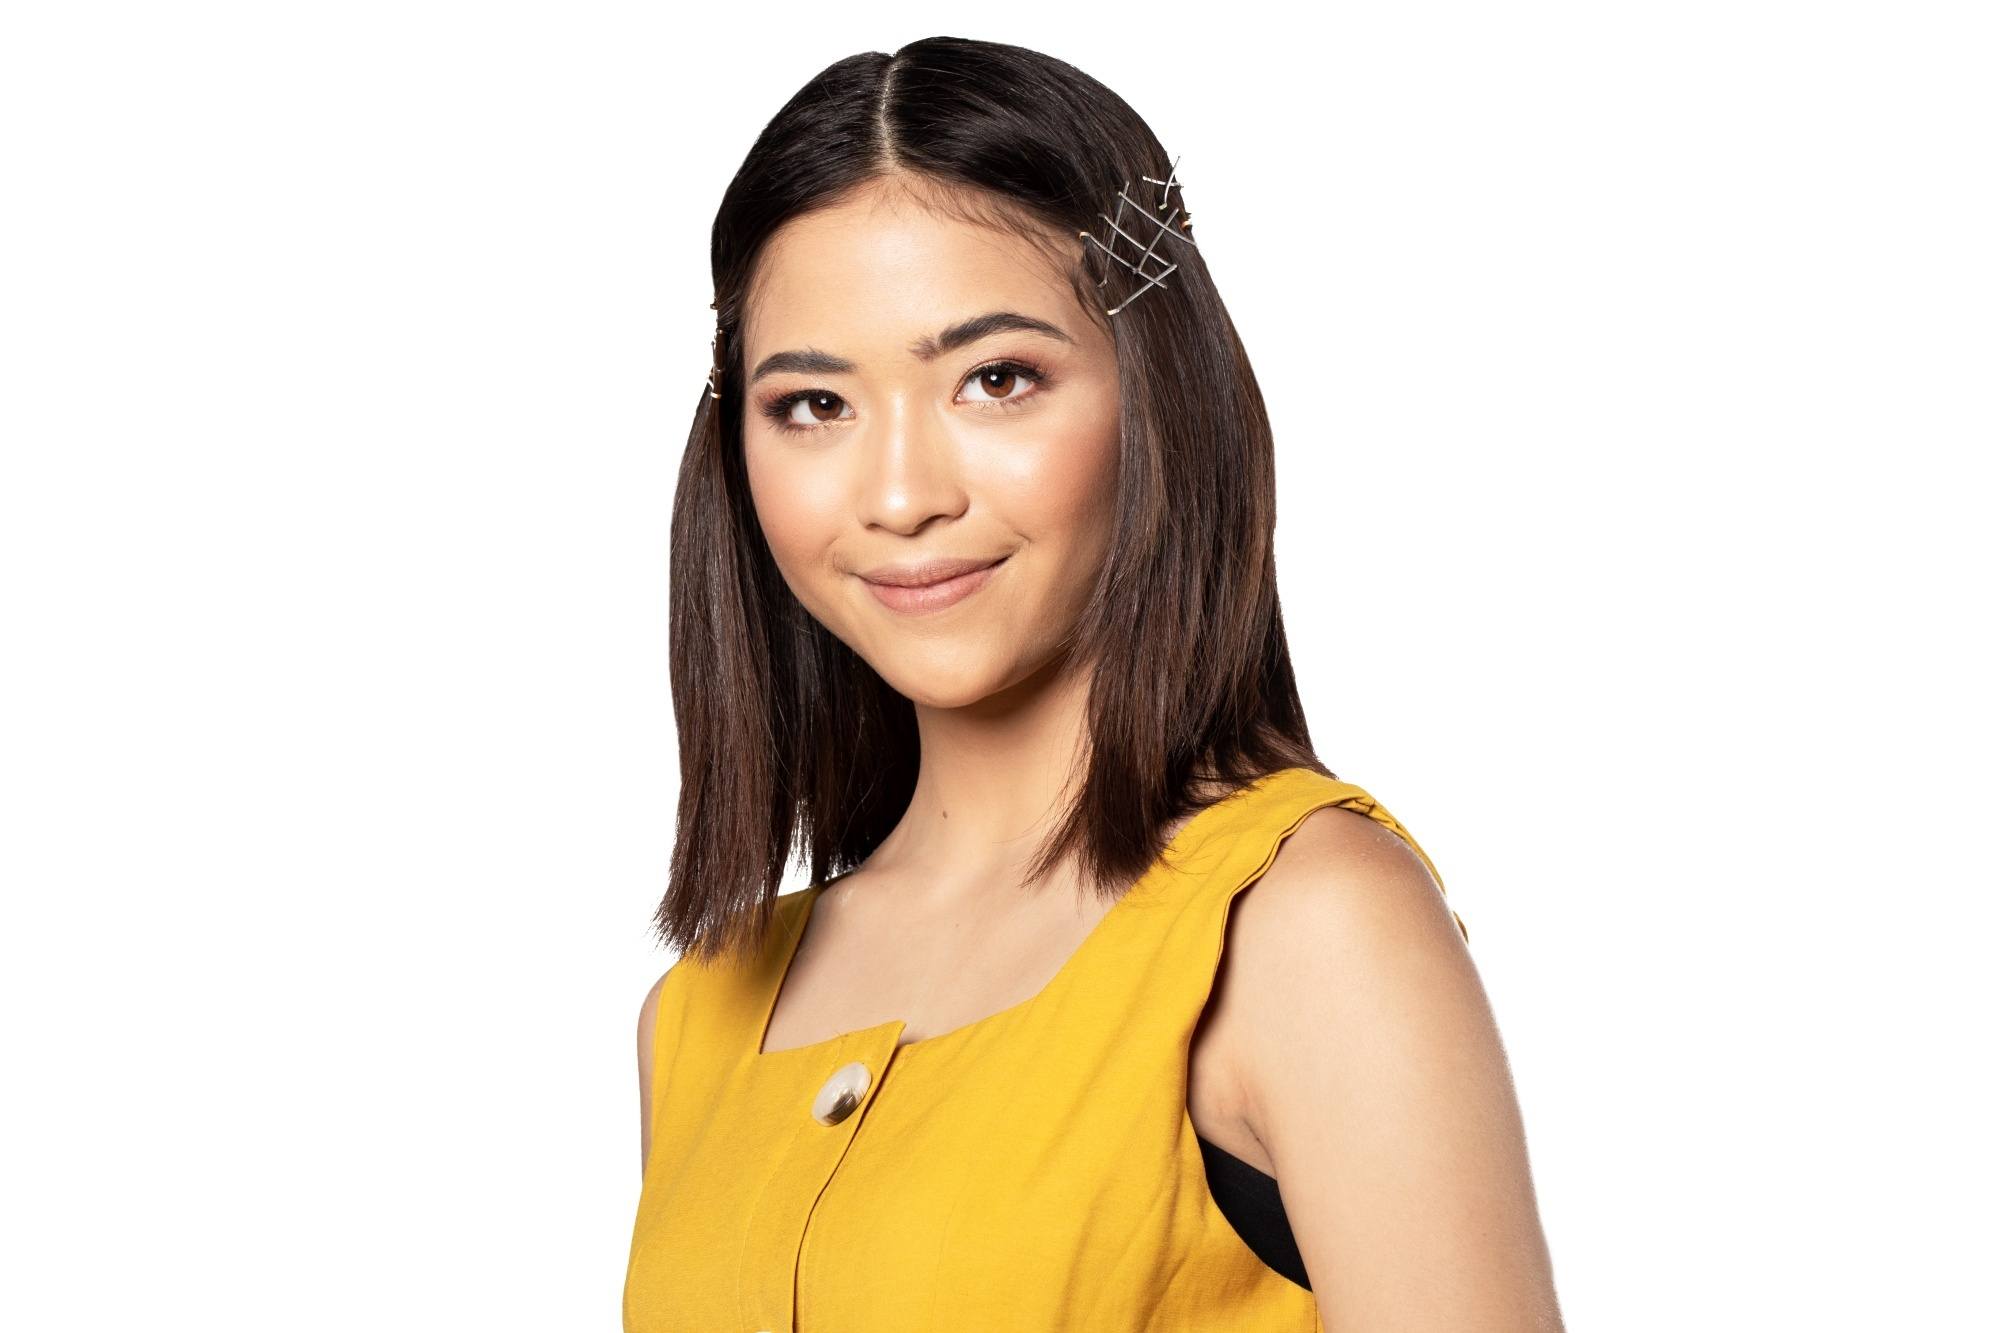 Asian woman with bobby pins on her hair wearing a yellow sleeveless top